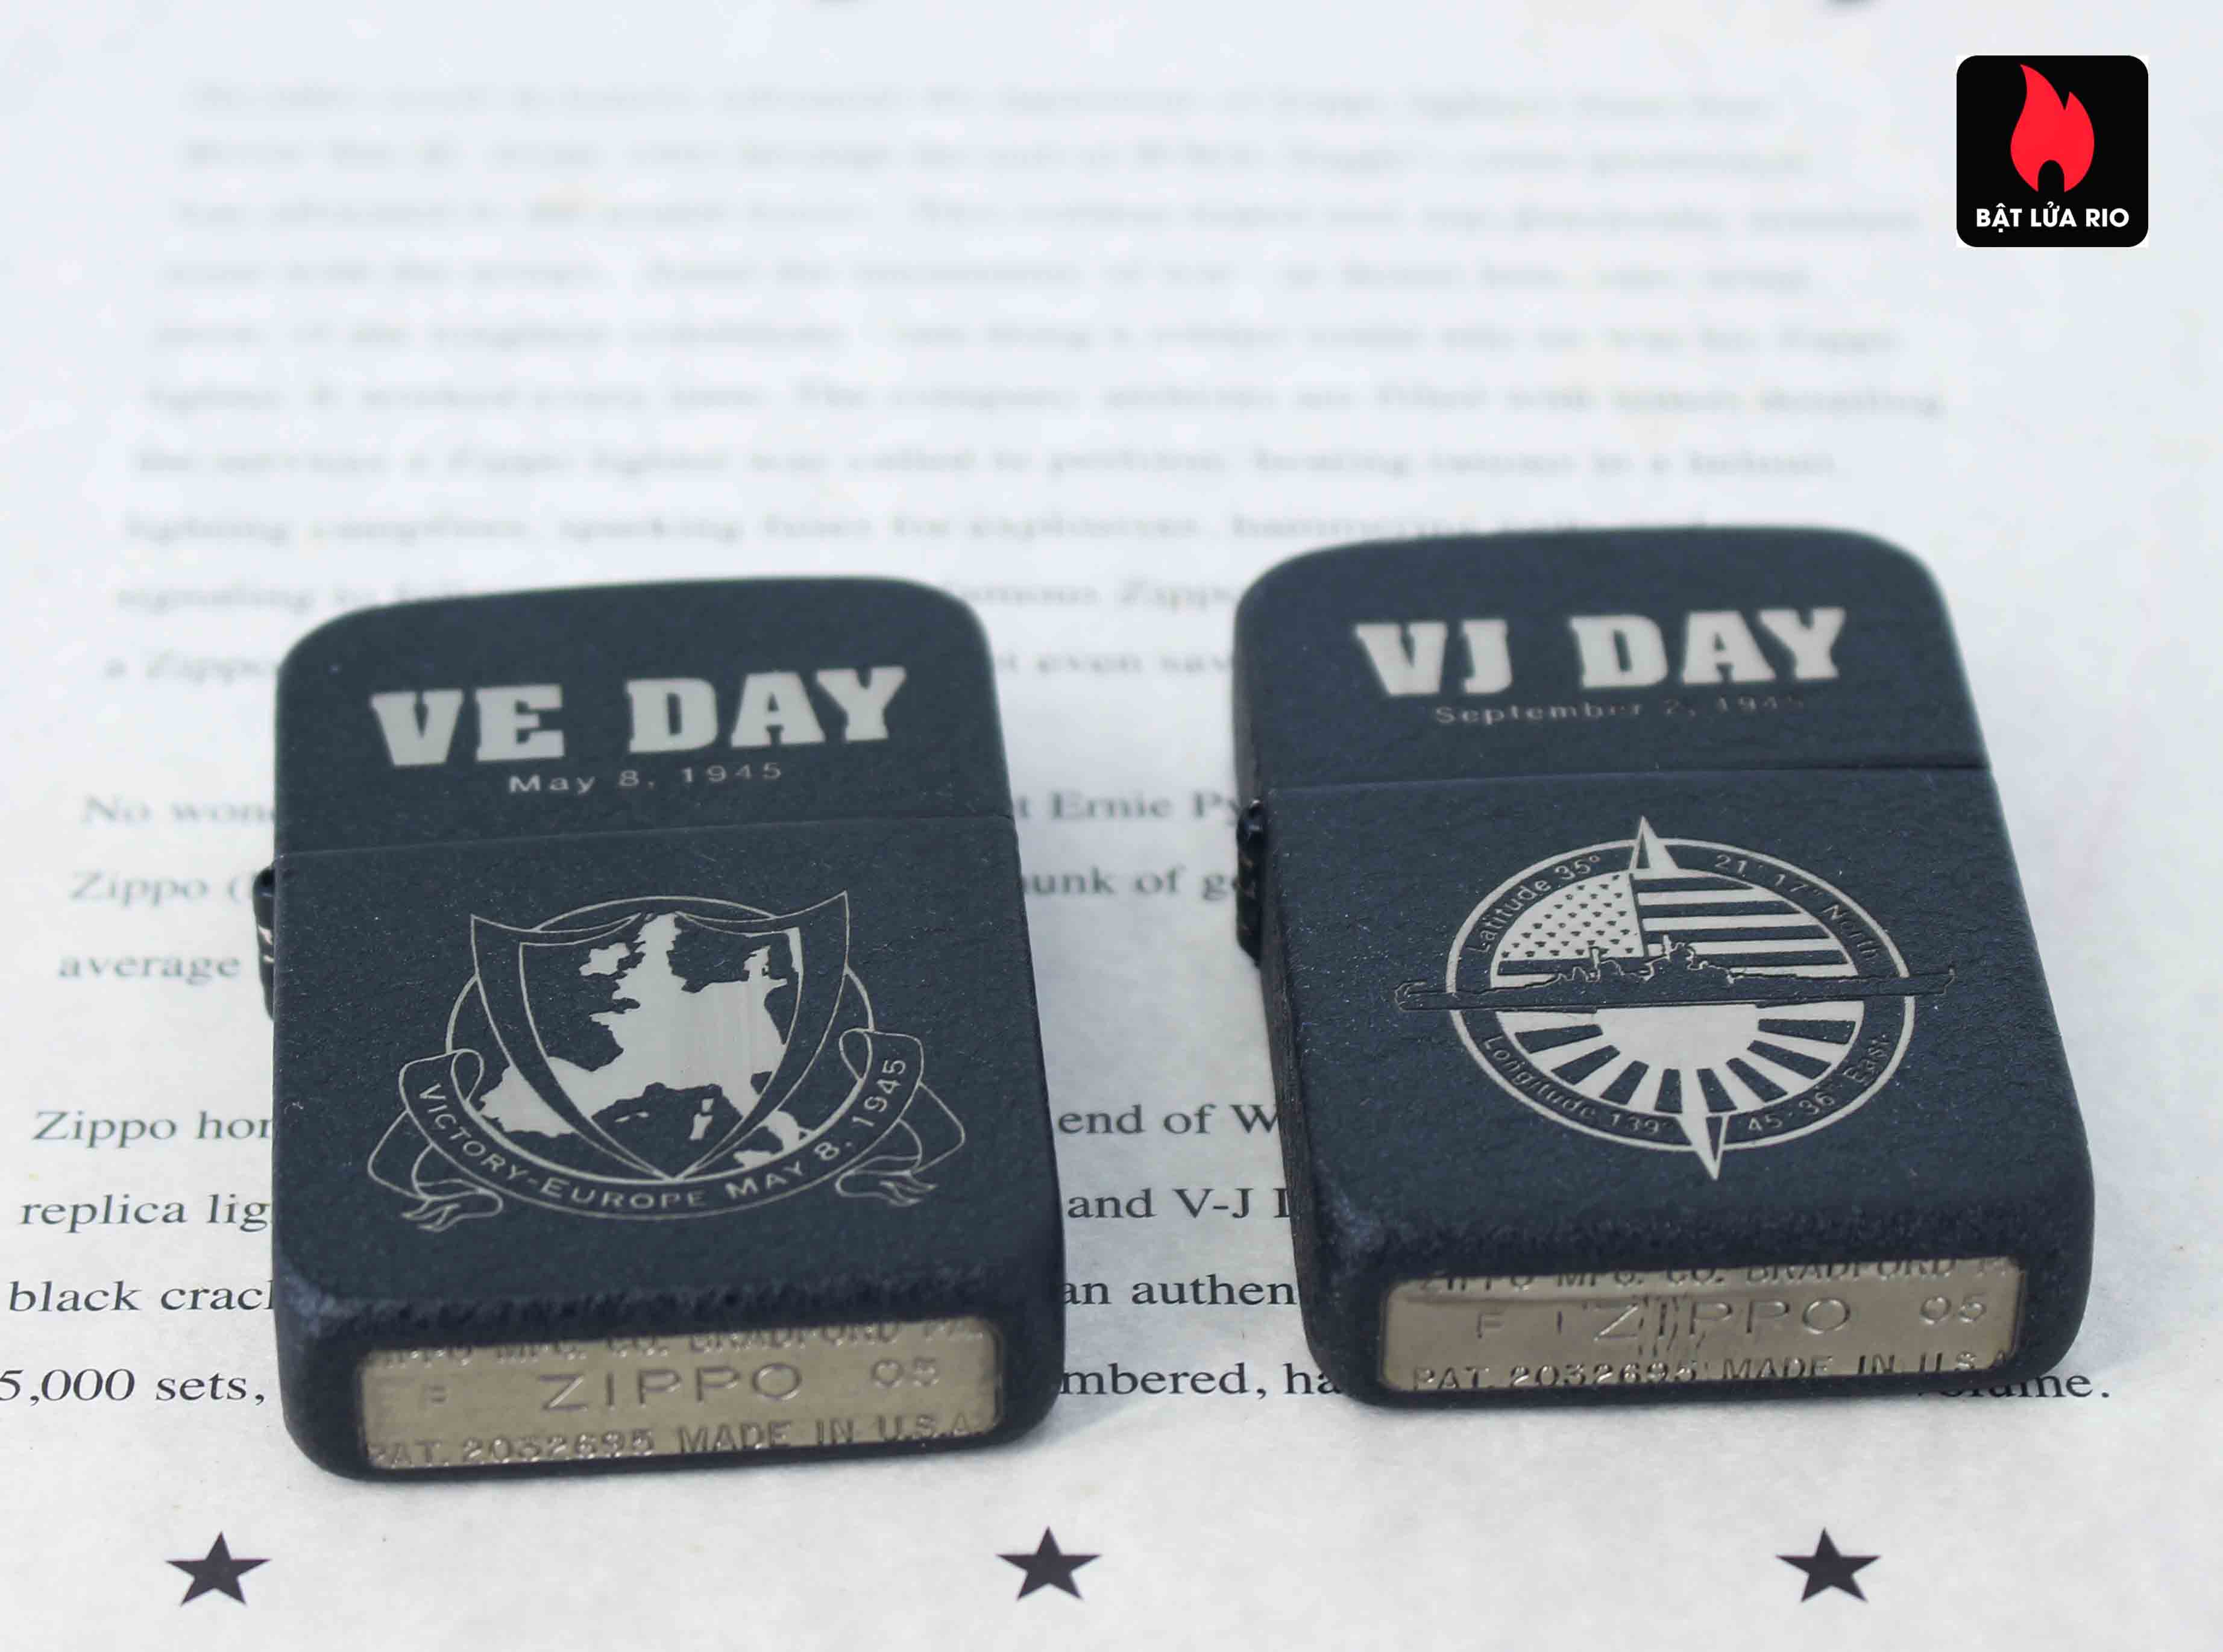 Zippo 2005 - WWII VE DAY & VJ DAY - Victory in Europe & Japan 13